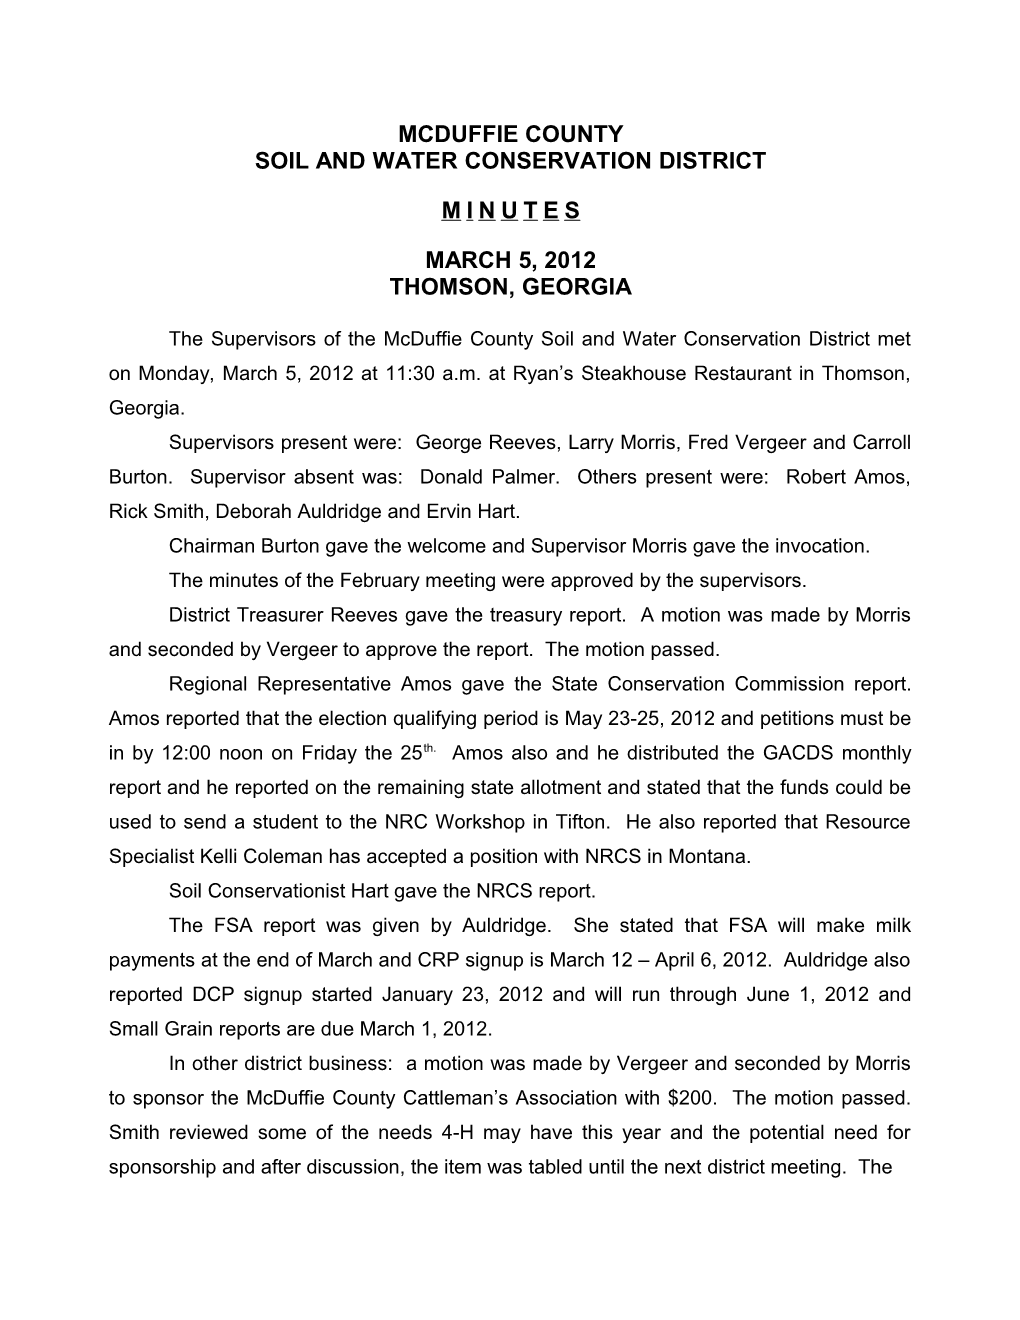 Mcduffie County District Minutes